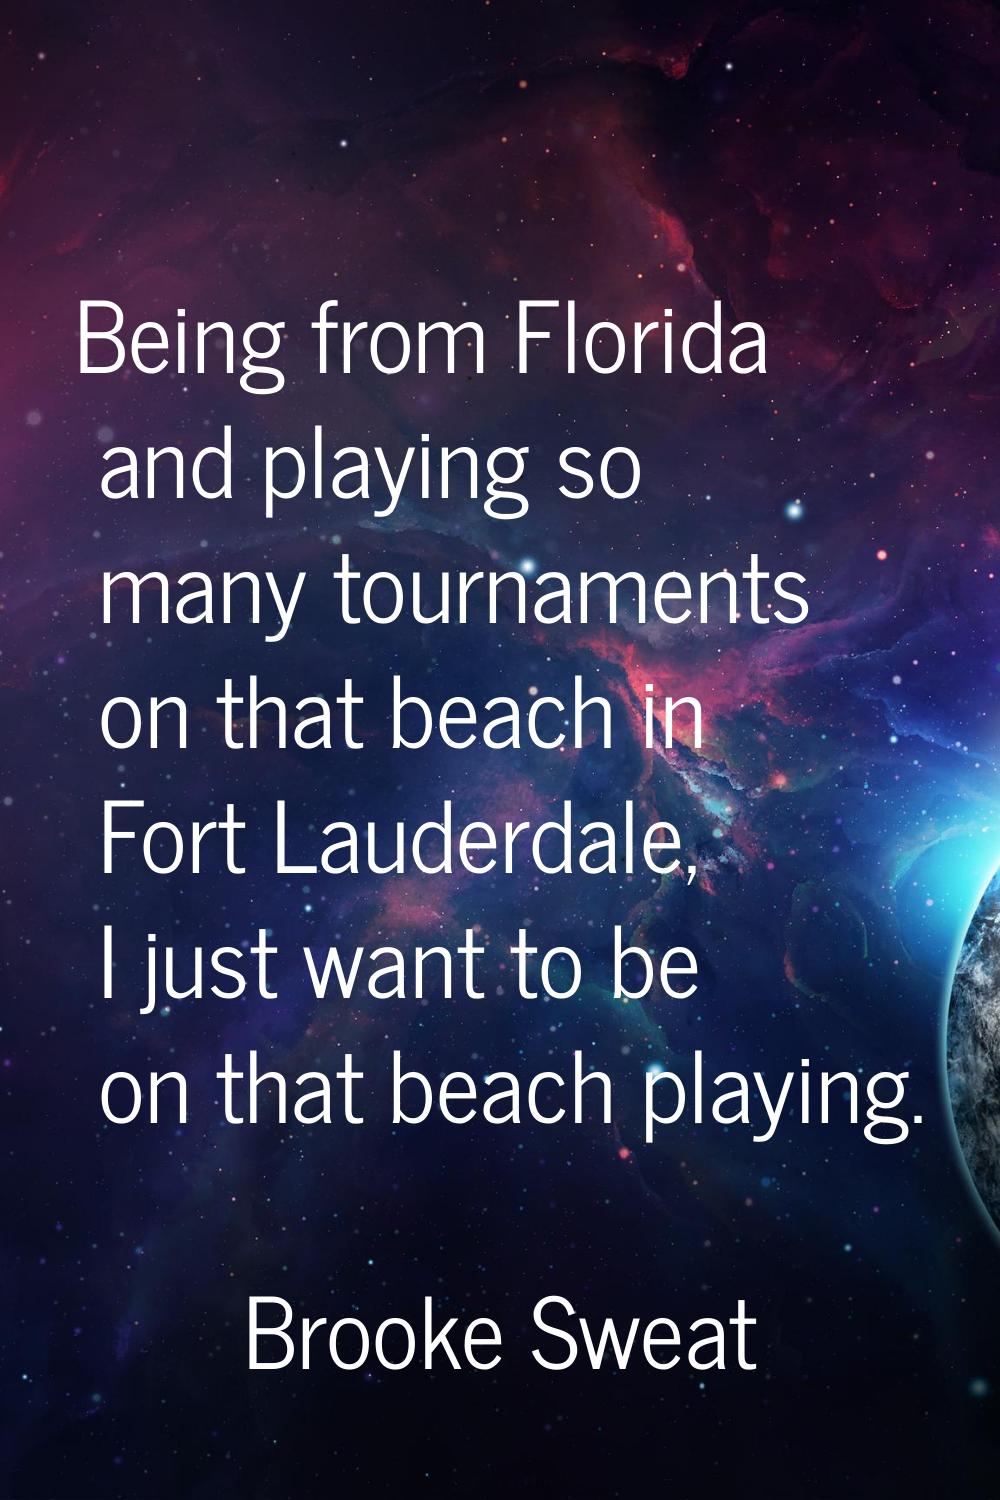 Being from Florida and playing so many tournaments on that beach in Fort Lauderdale, I just want to